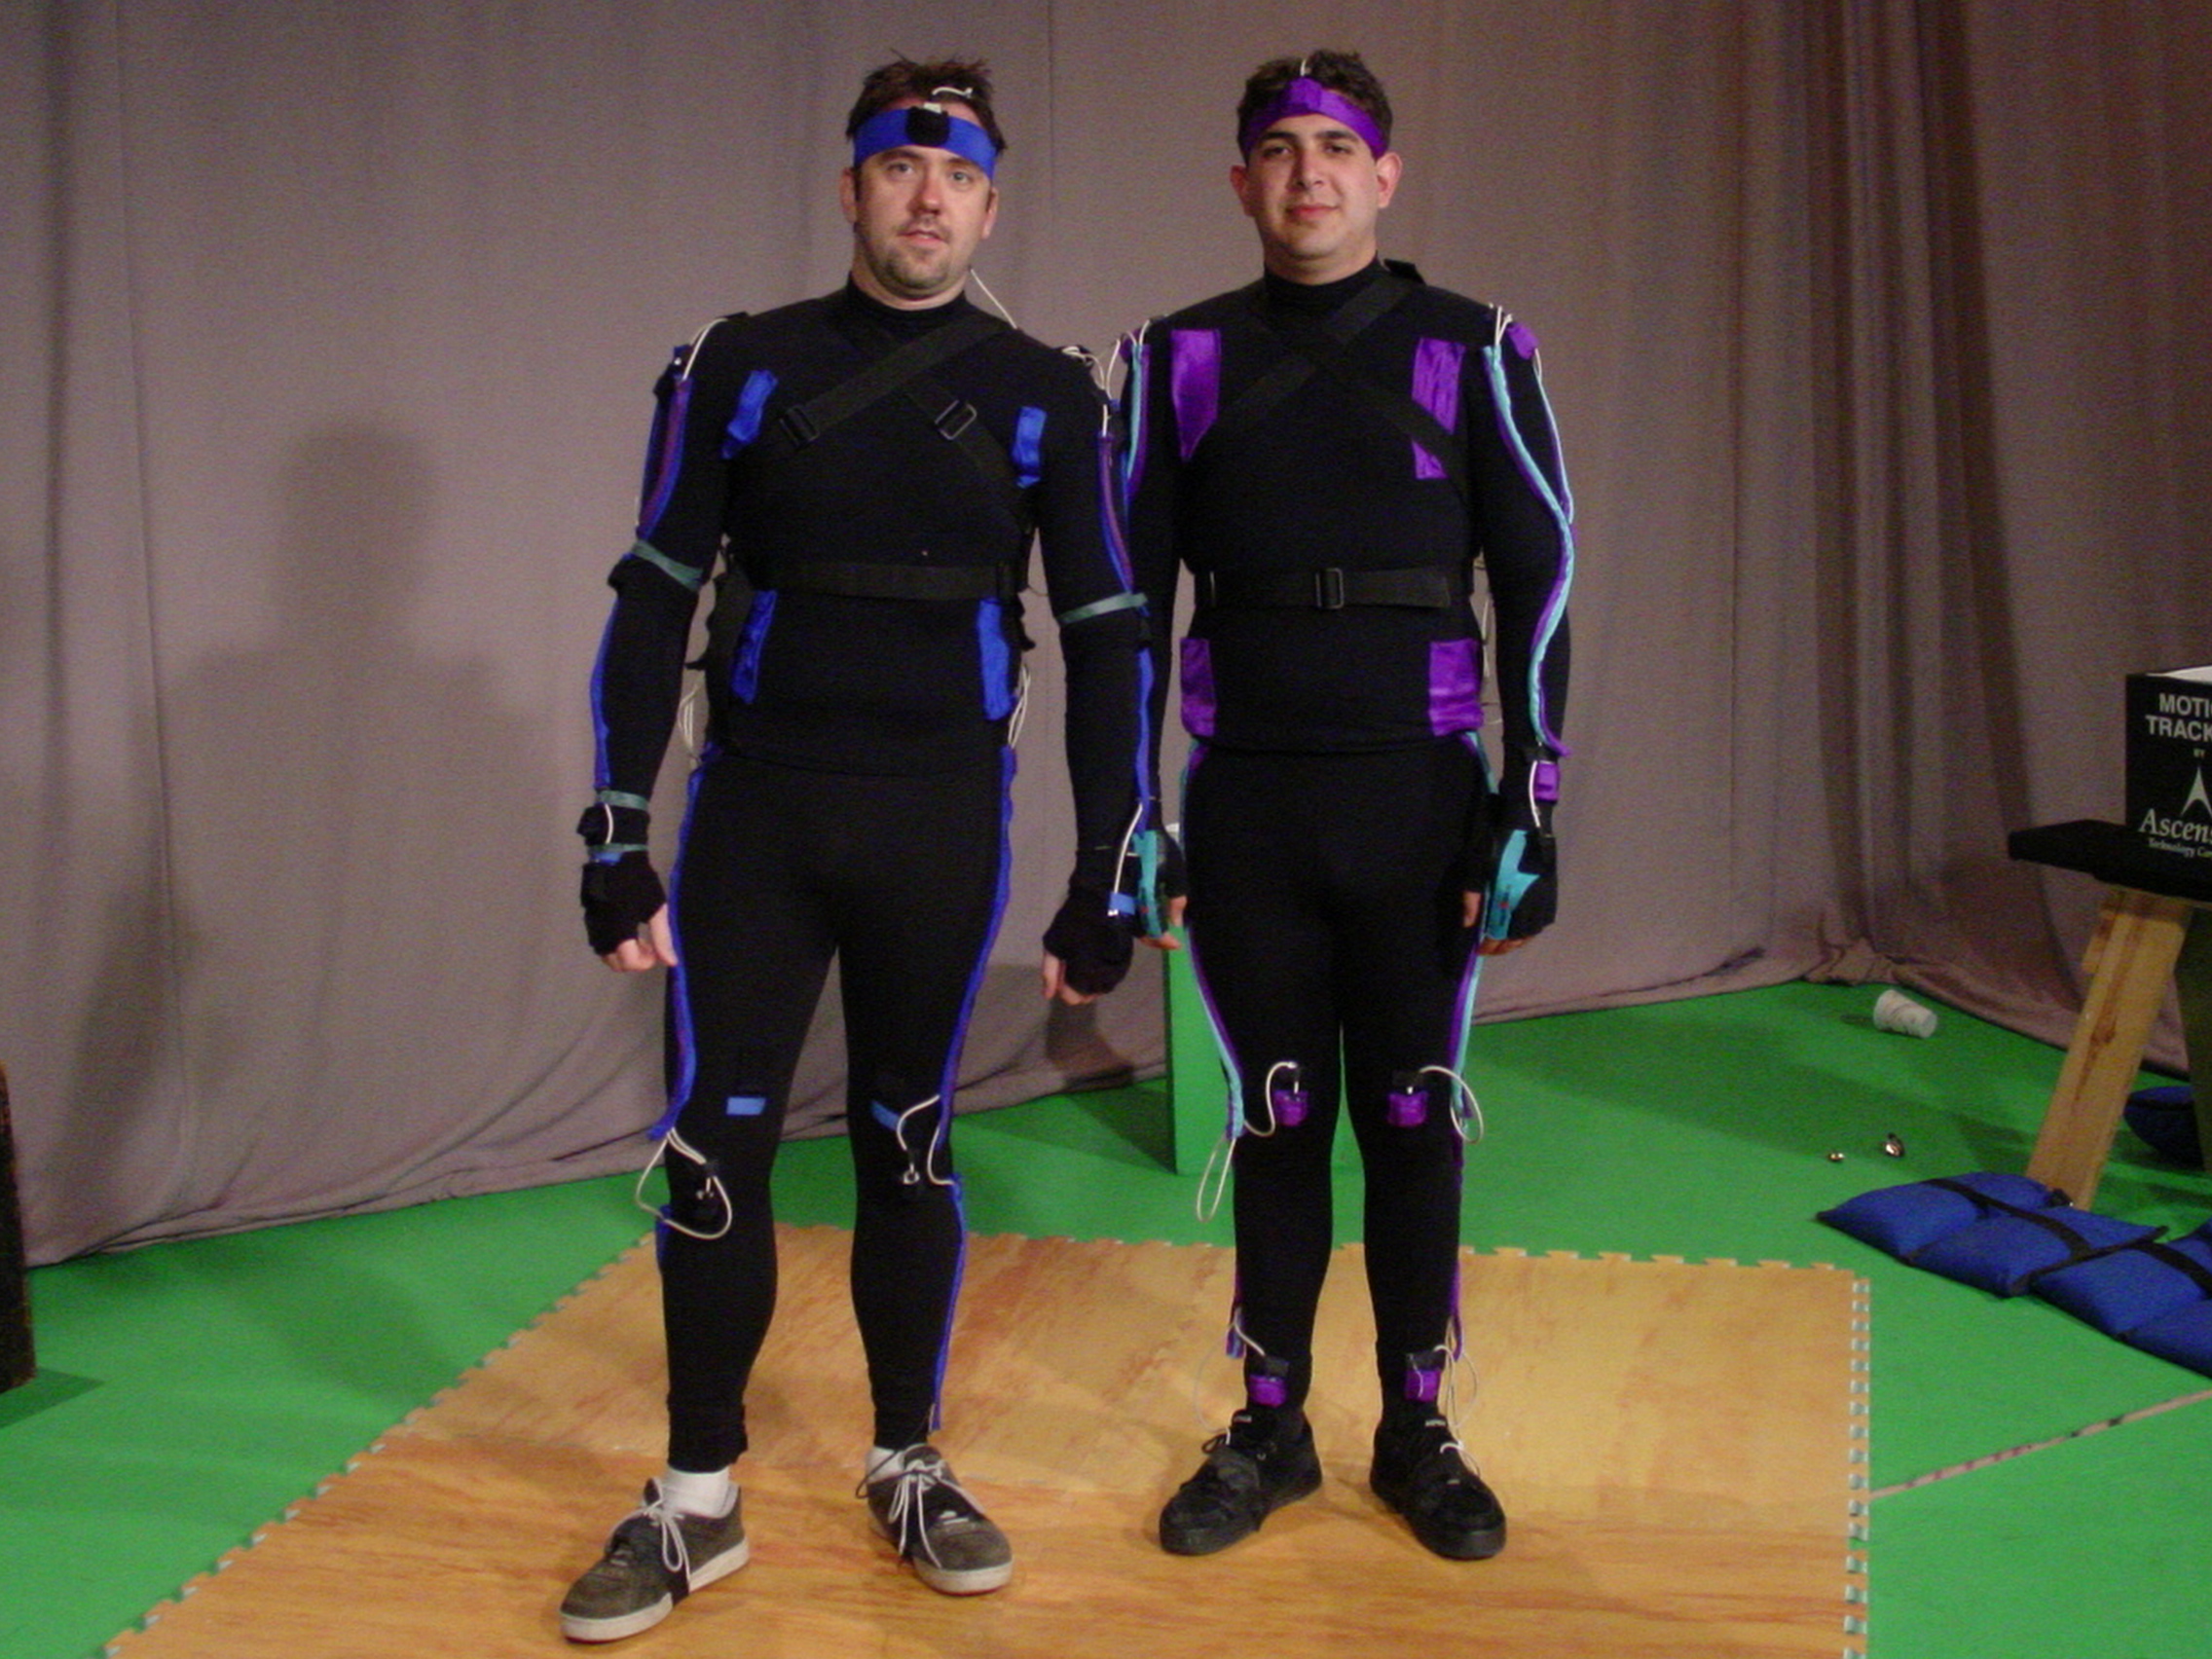 Brian McCulley and John Crockett in motion capture suits for V-Funny.